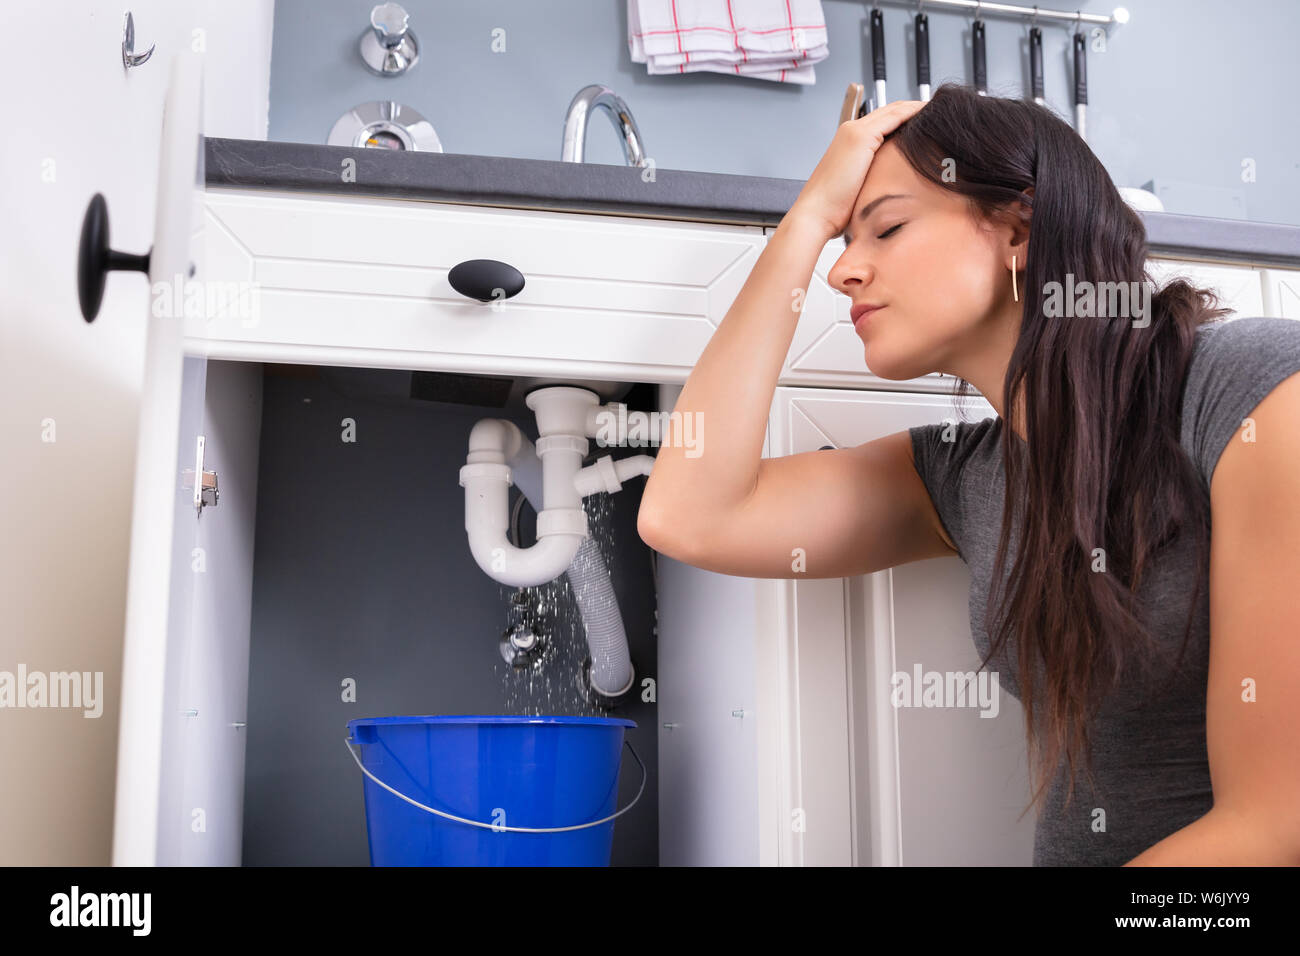 Worried Woman Collecting Water Leaking From Sink In Blue Bucket Stock Photo